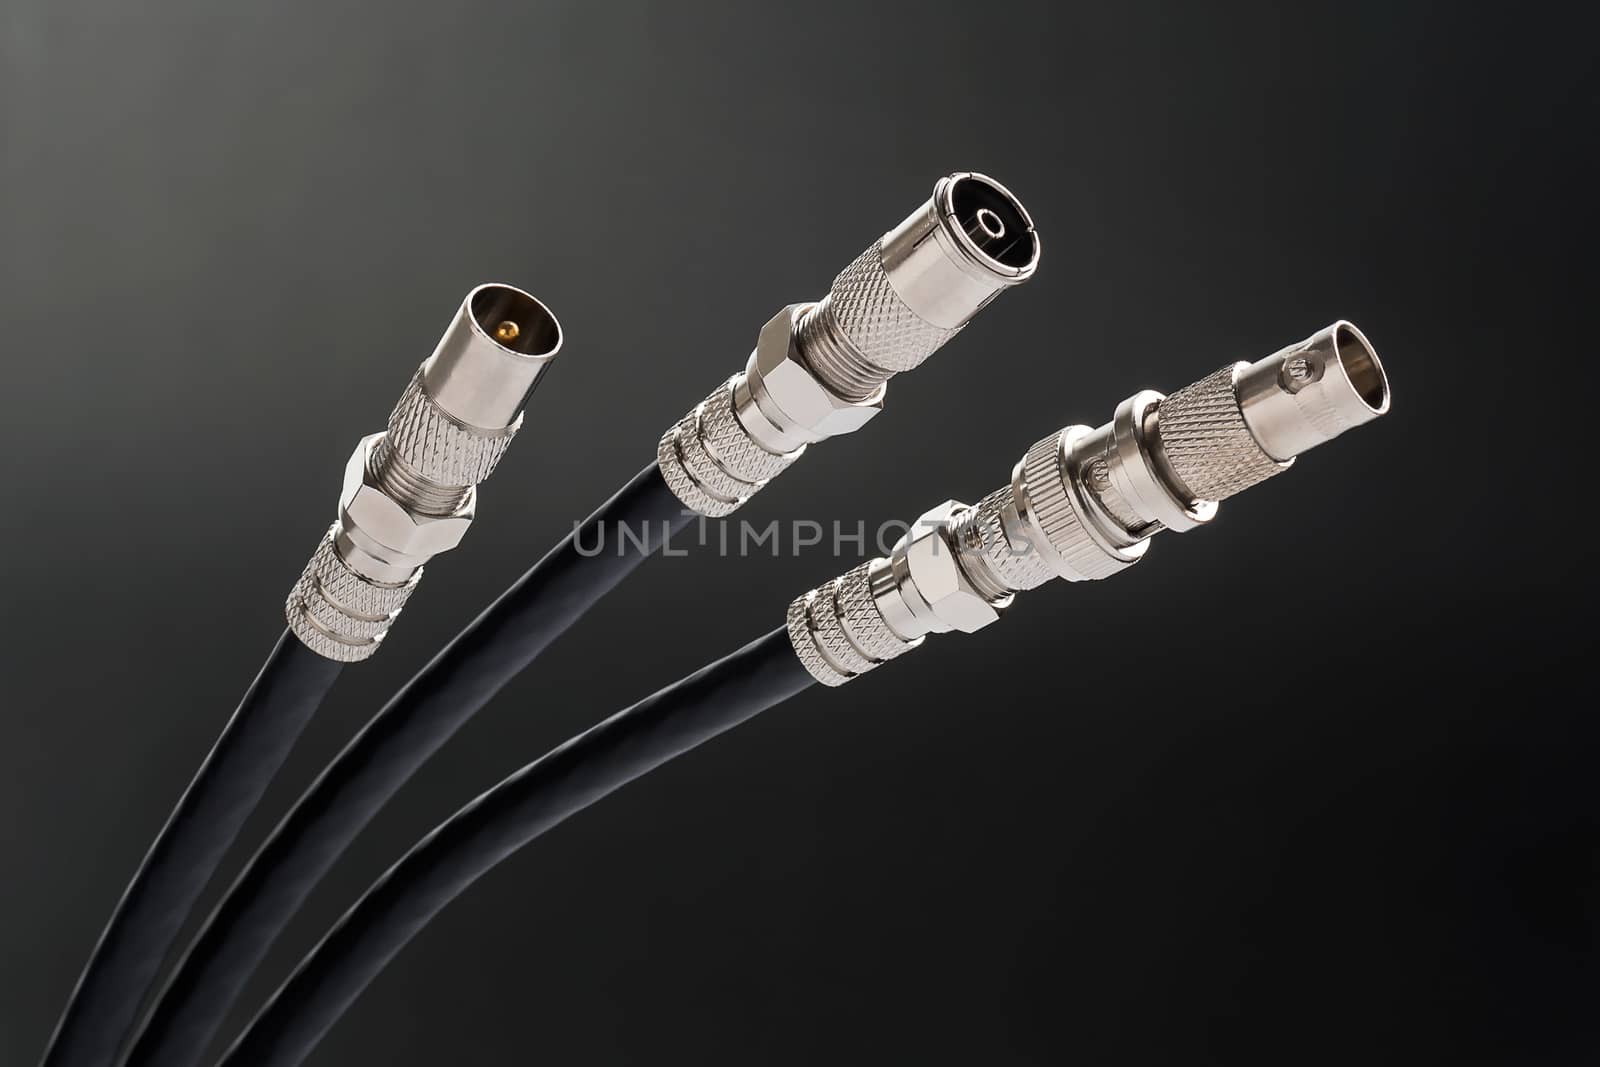 Coaxial connectors by SergeyF